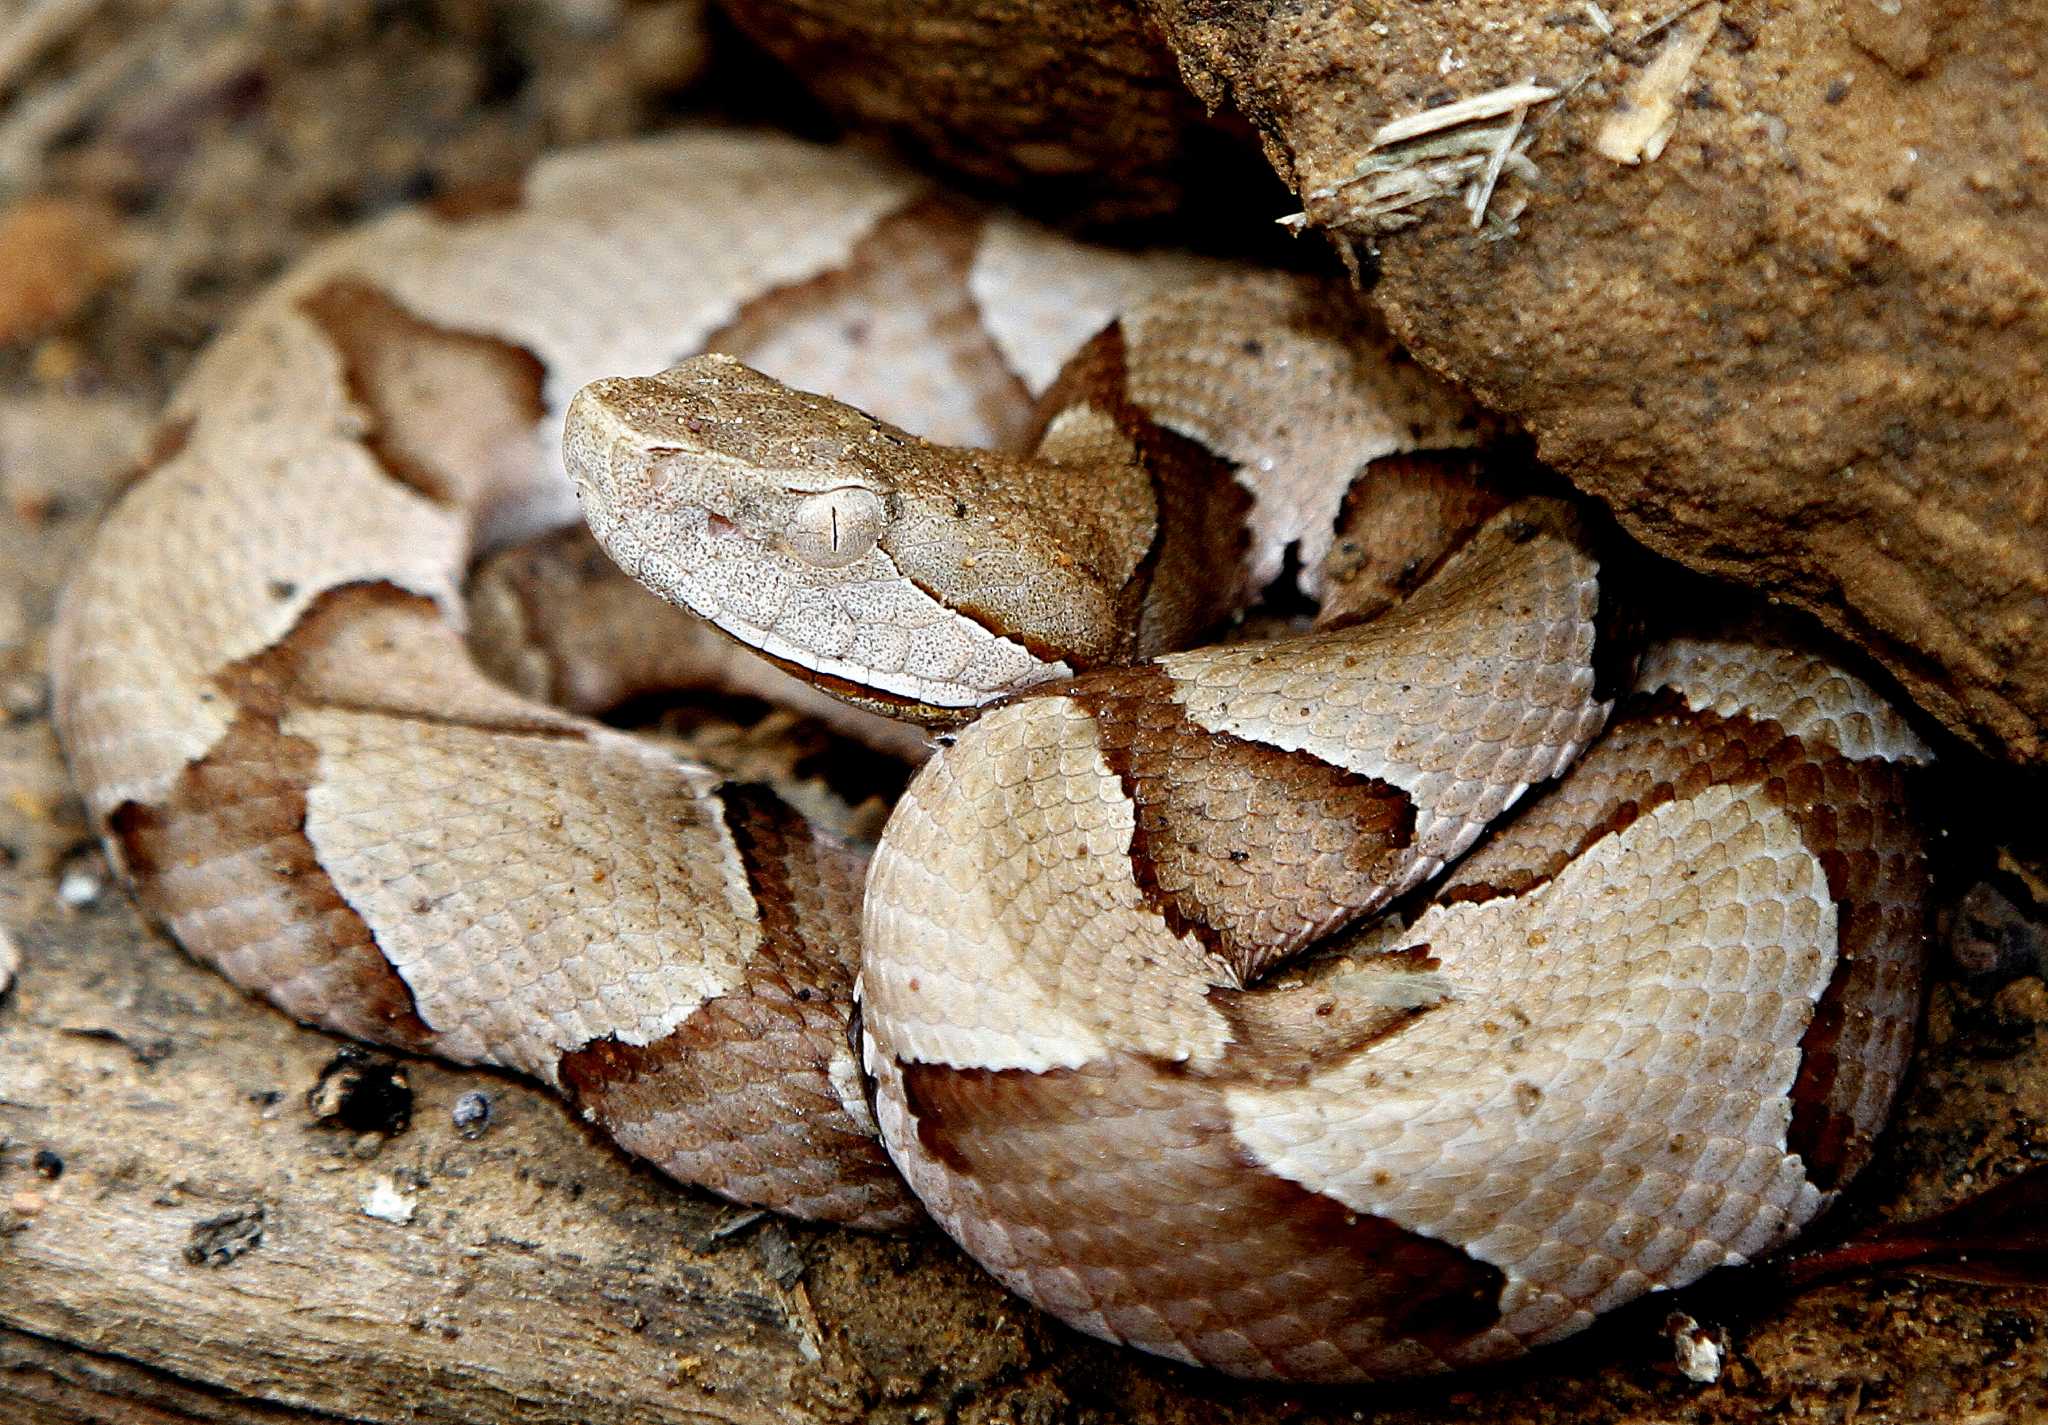 Copperhead snakes engage in nightly summertime feeding congregation - Houston Chronicle2048 x 1425